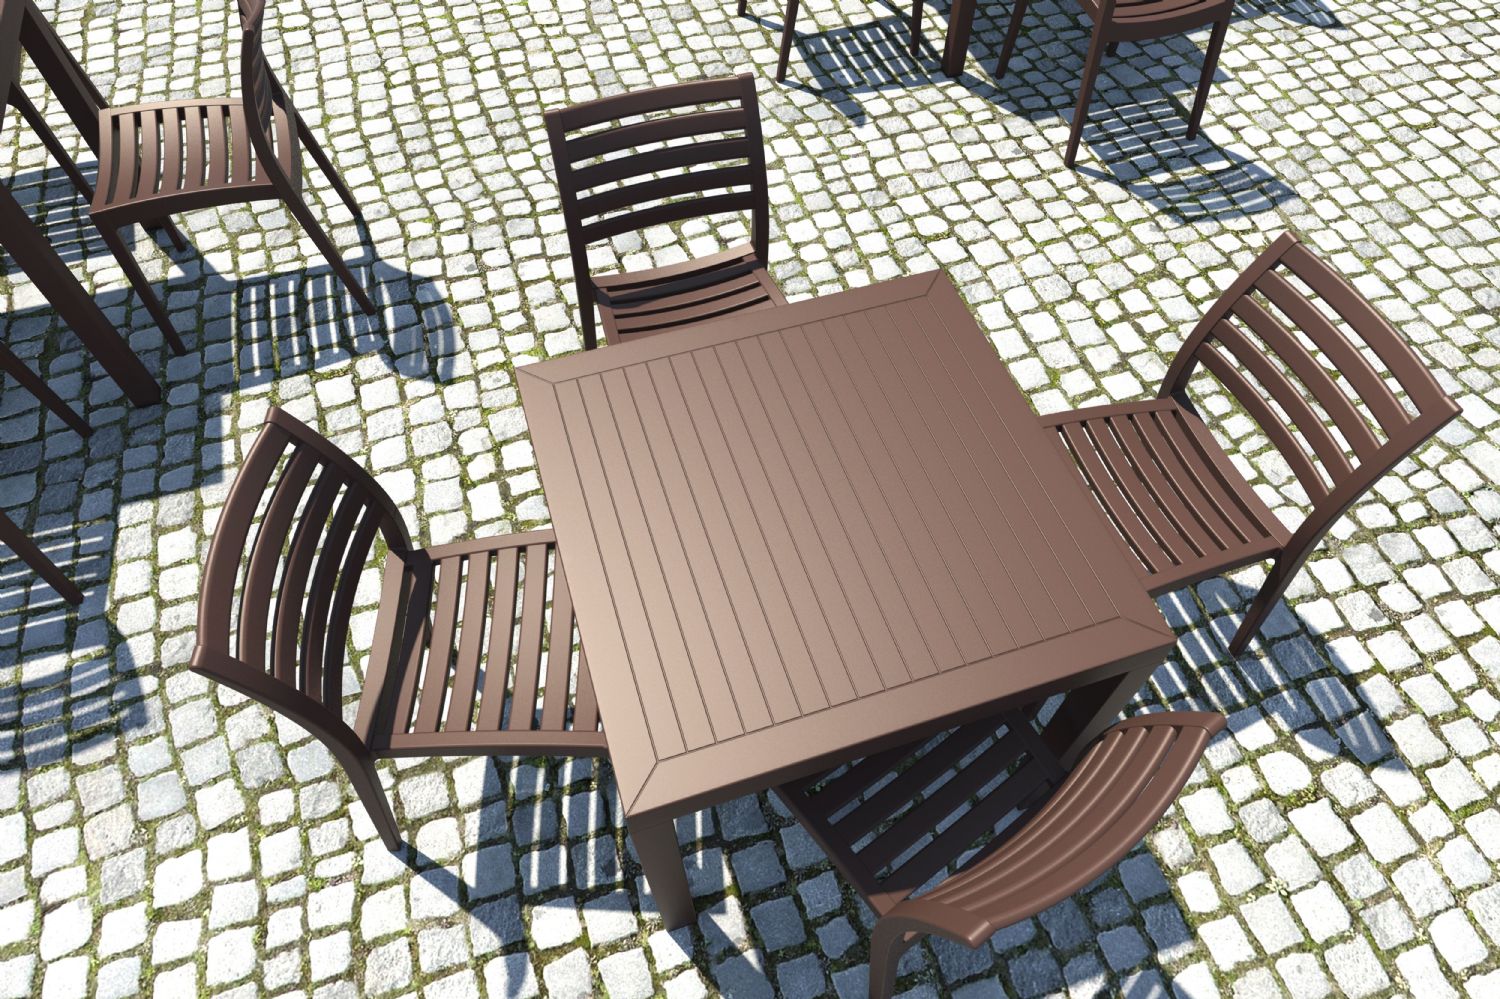 Ares Resin Square Outdoor Dining Set 5 Piece with Side Chairs Cafe Latte ISP1641S-TEA - 5